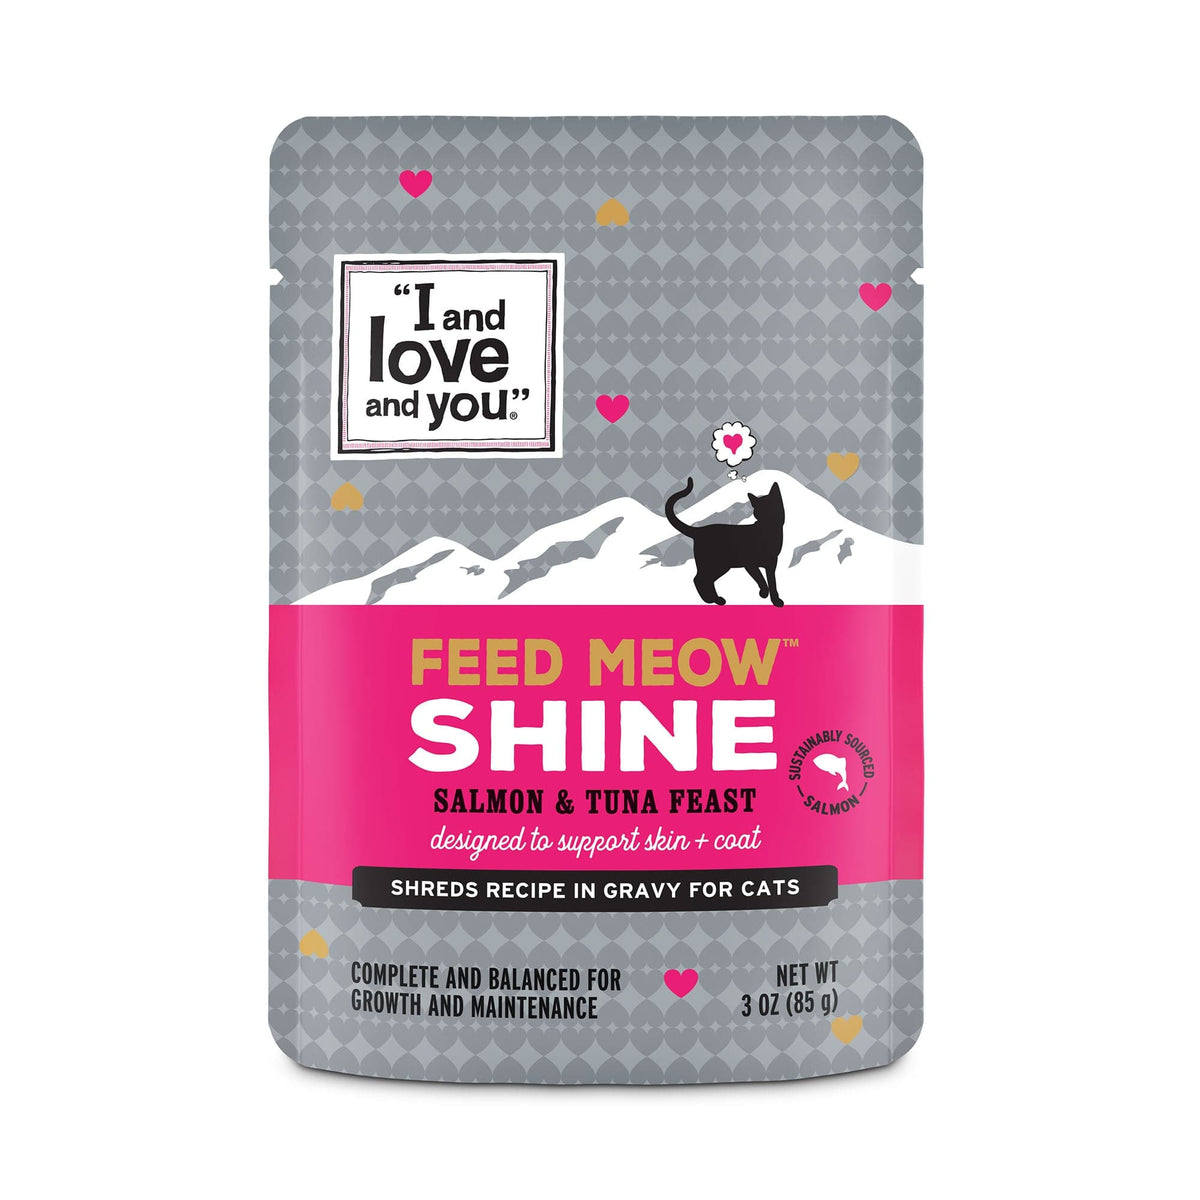 Feed Meow Shine cat food package with black cat and signs.